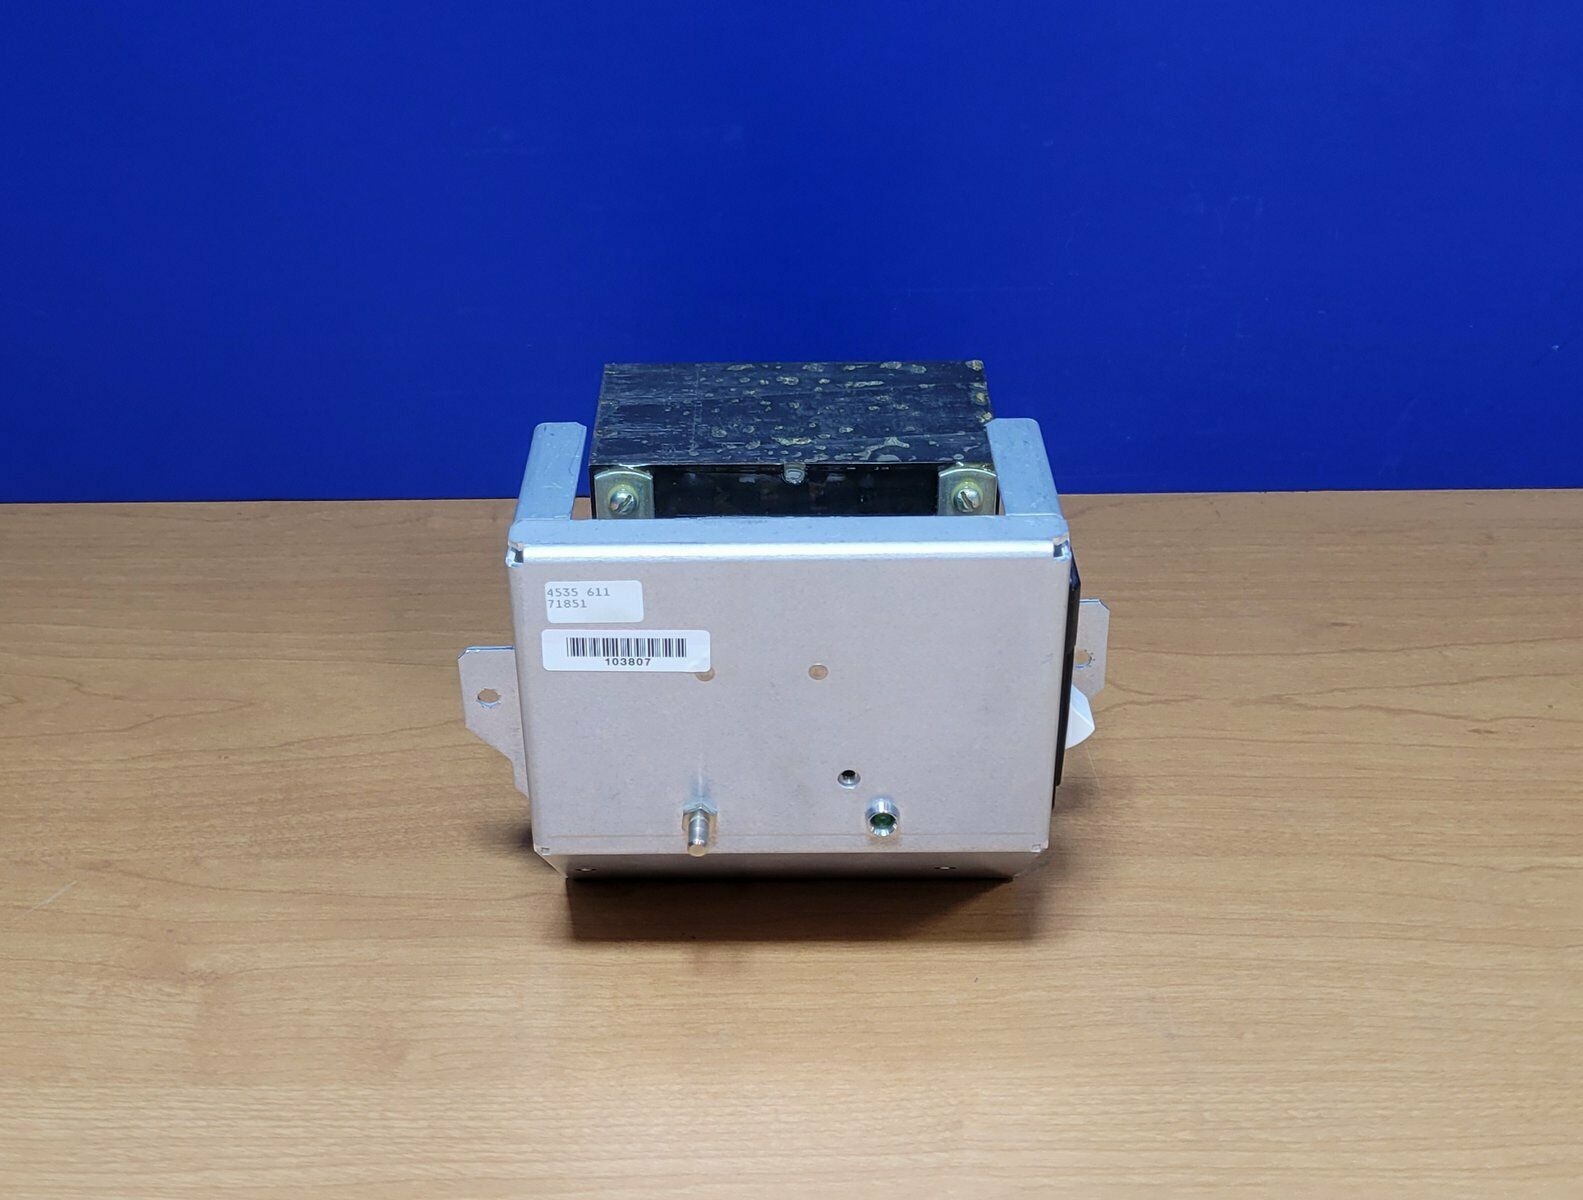 PHILIPS ULTRASOUND SYSTEM IE33/IU22 453561171851 AC POWER TRAY DIAGNOSTIC ULTRASOUND MACHINES FOR SALE